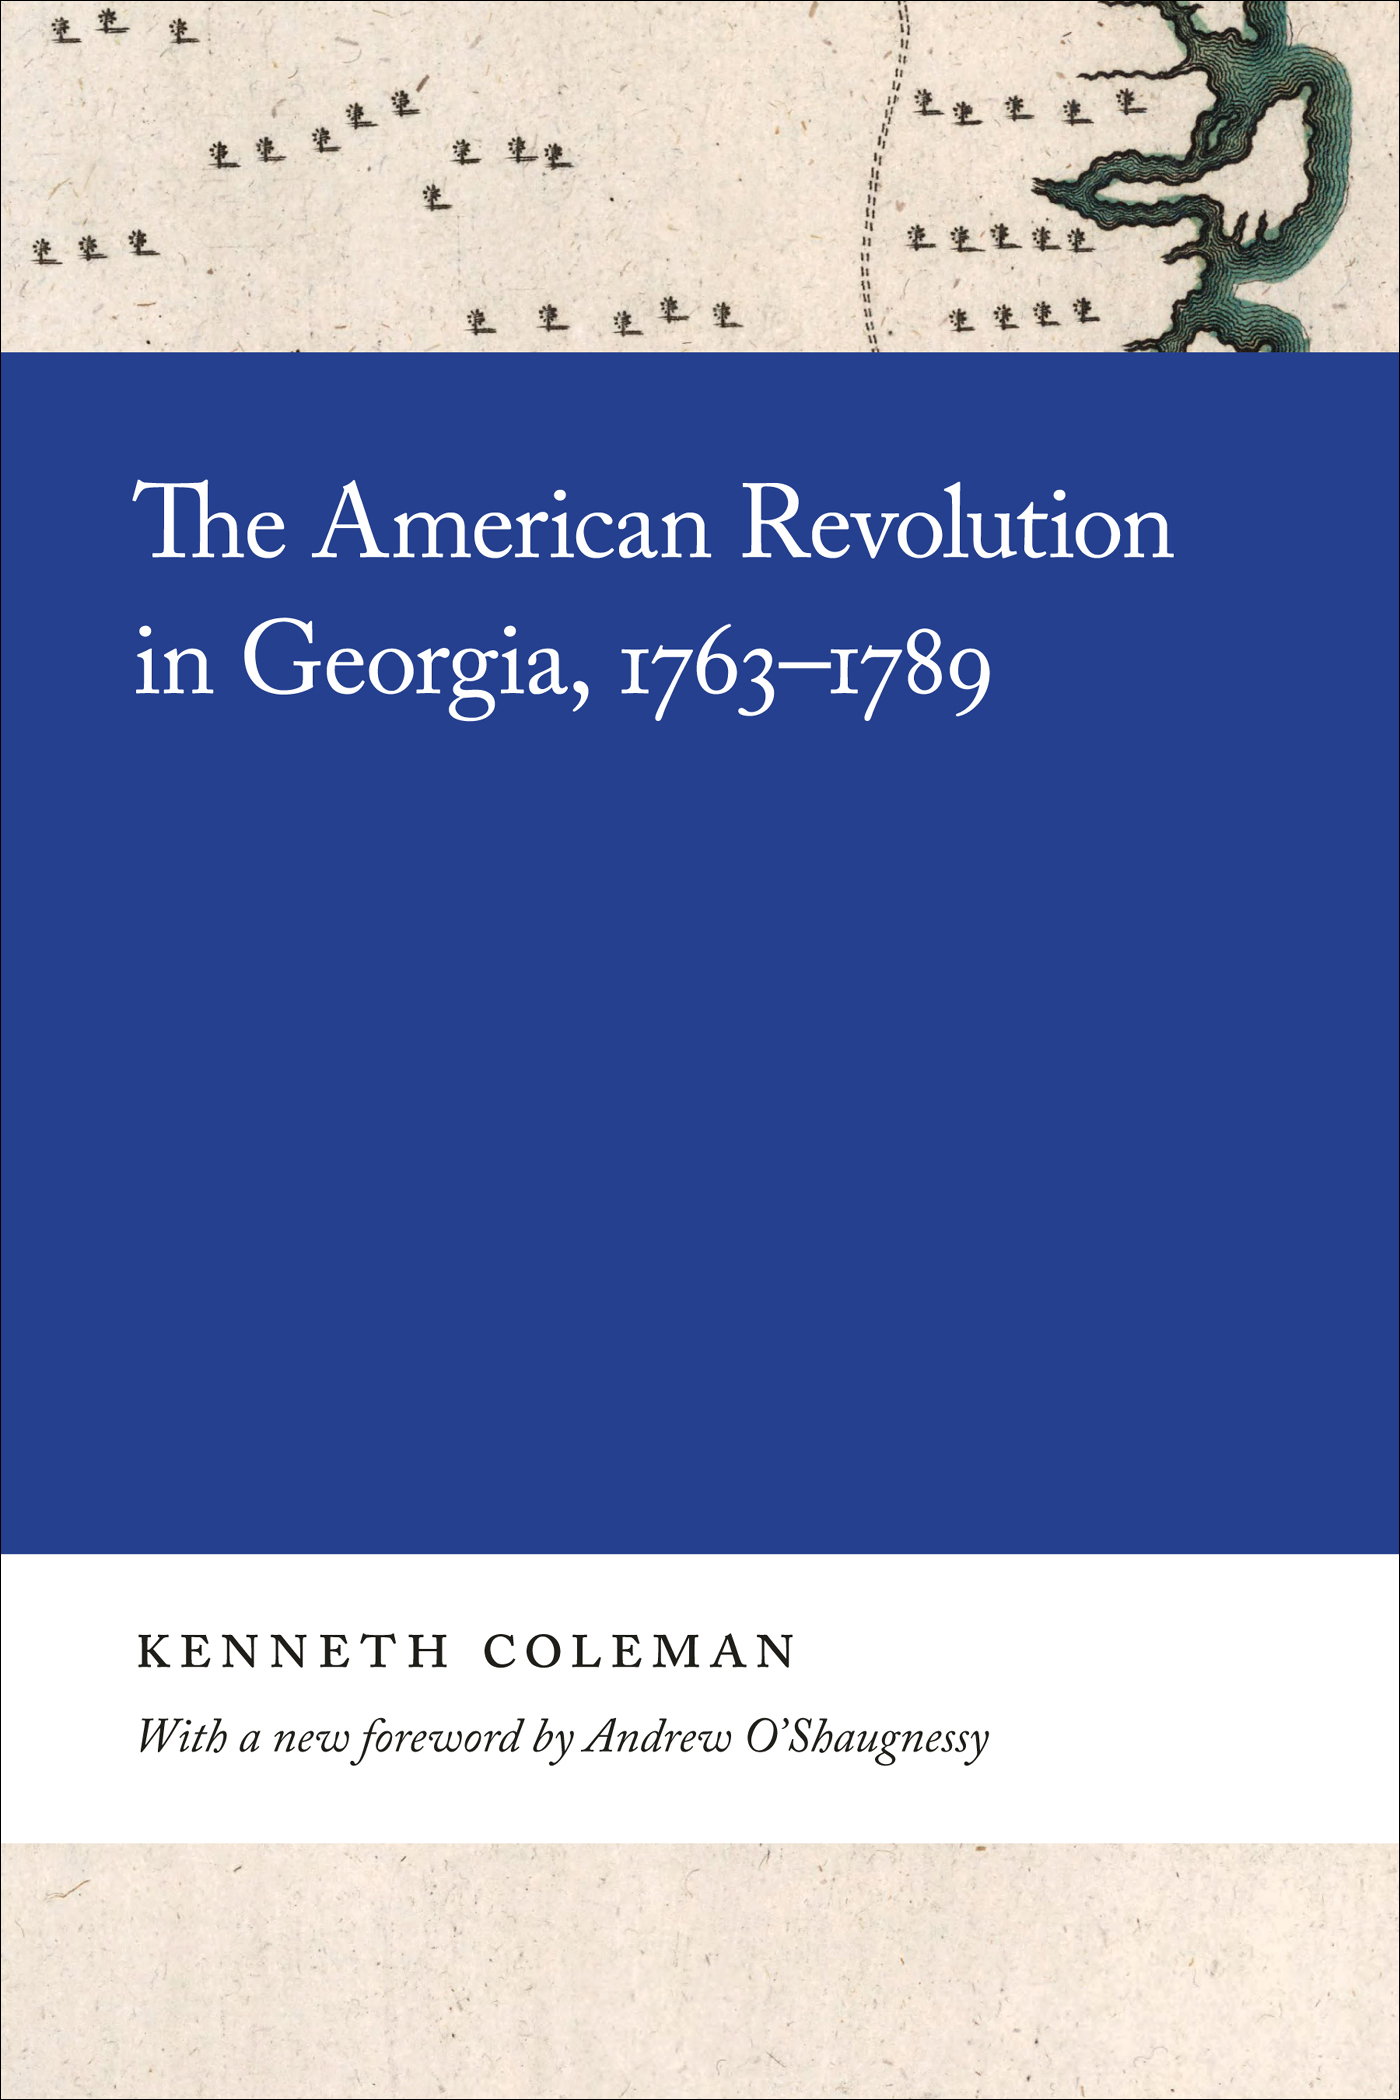 Cover page of the book “The American Revolution in Georgia, 1763 - 1789.”